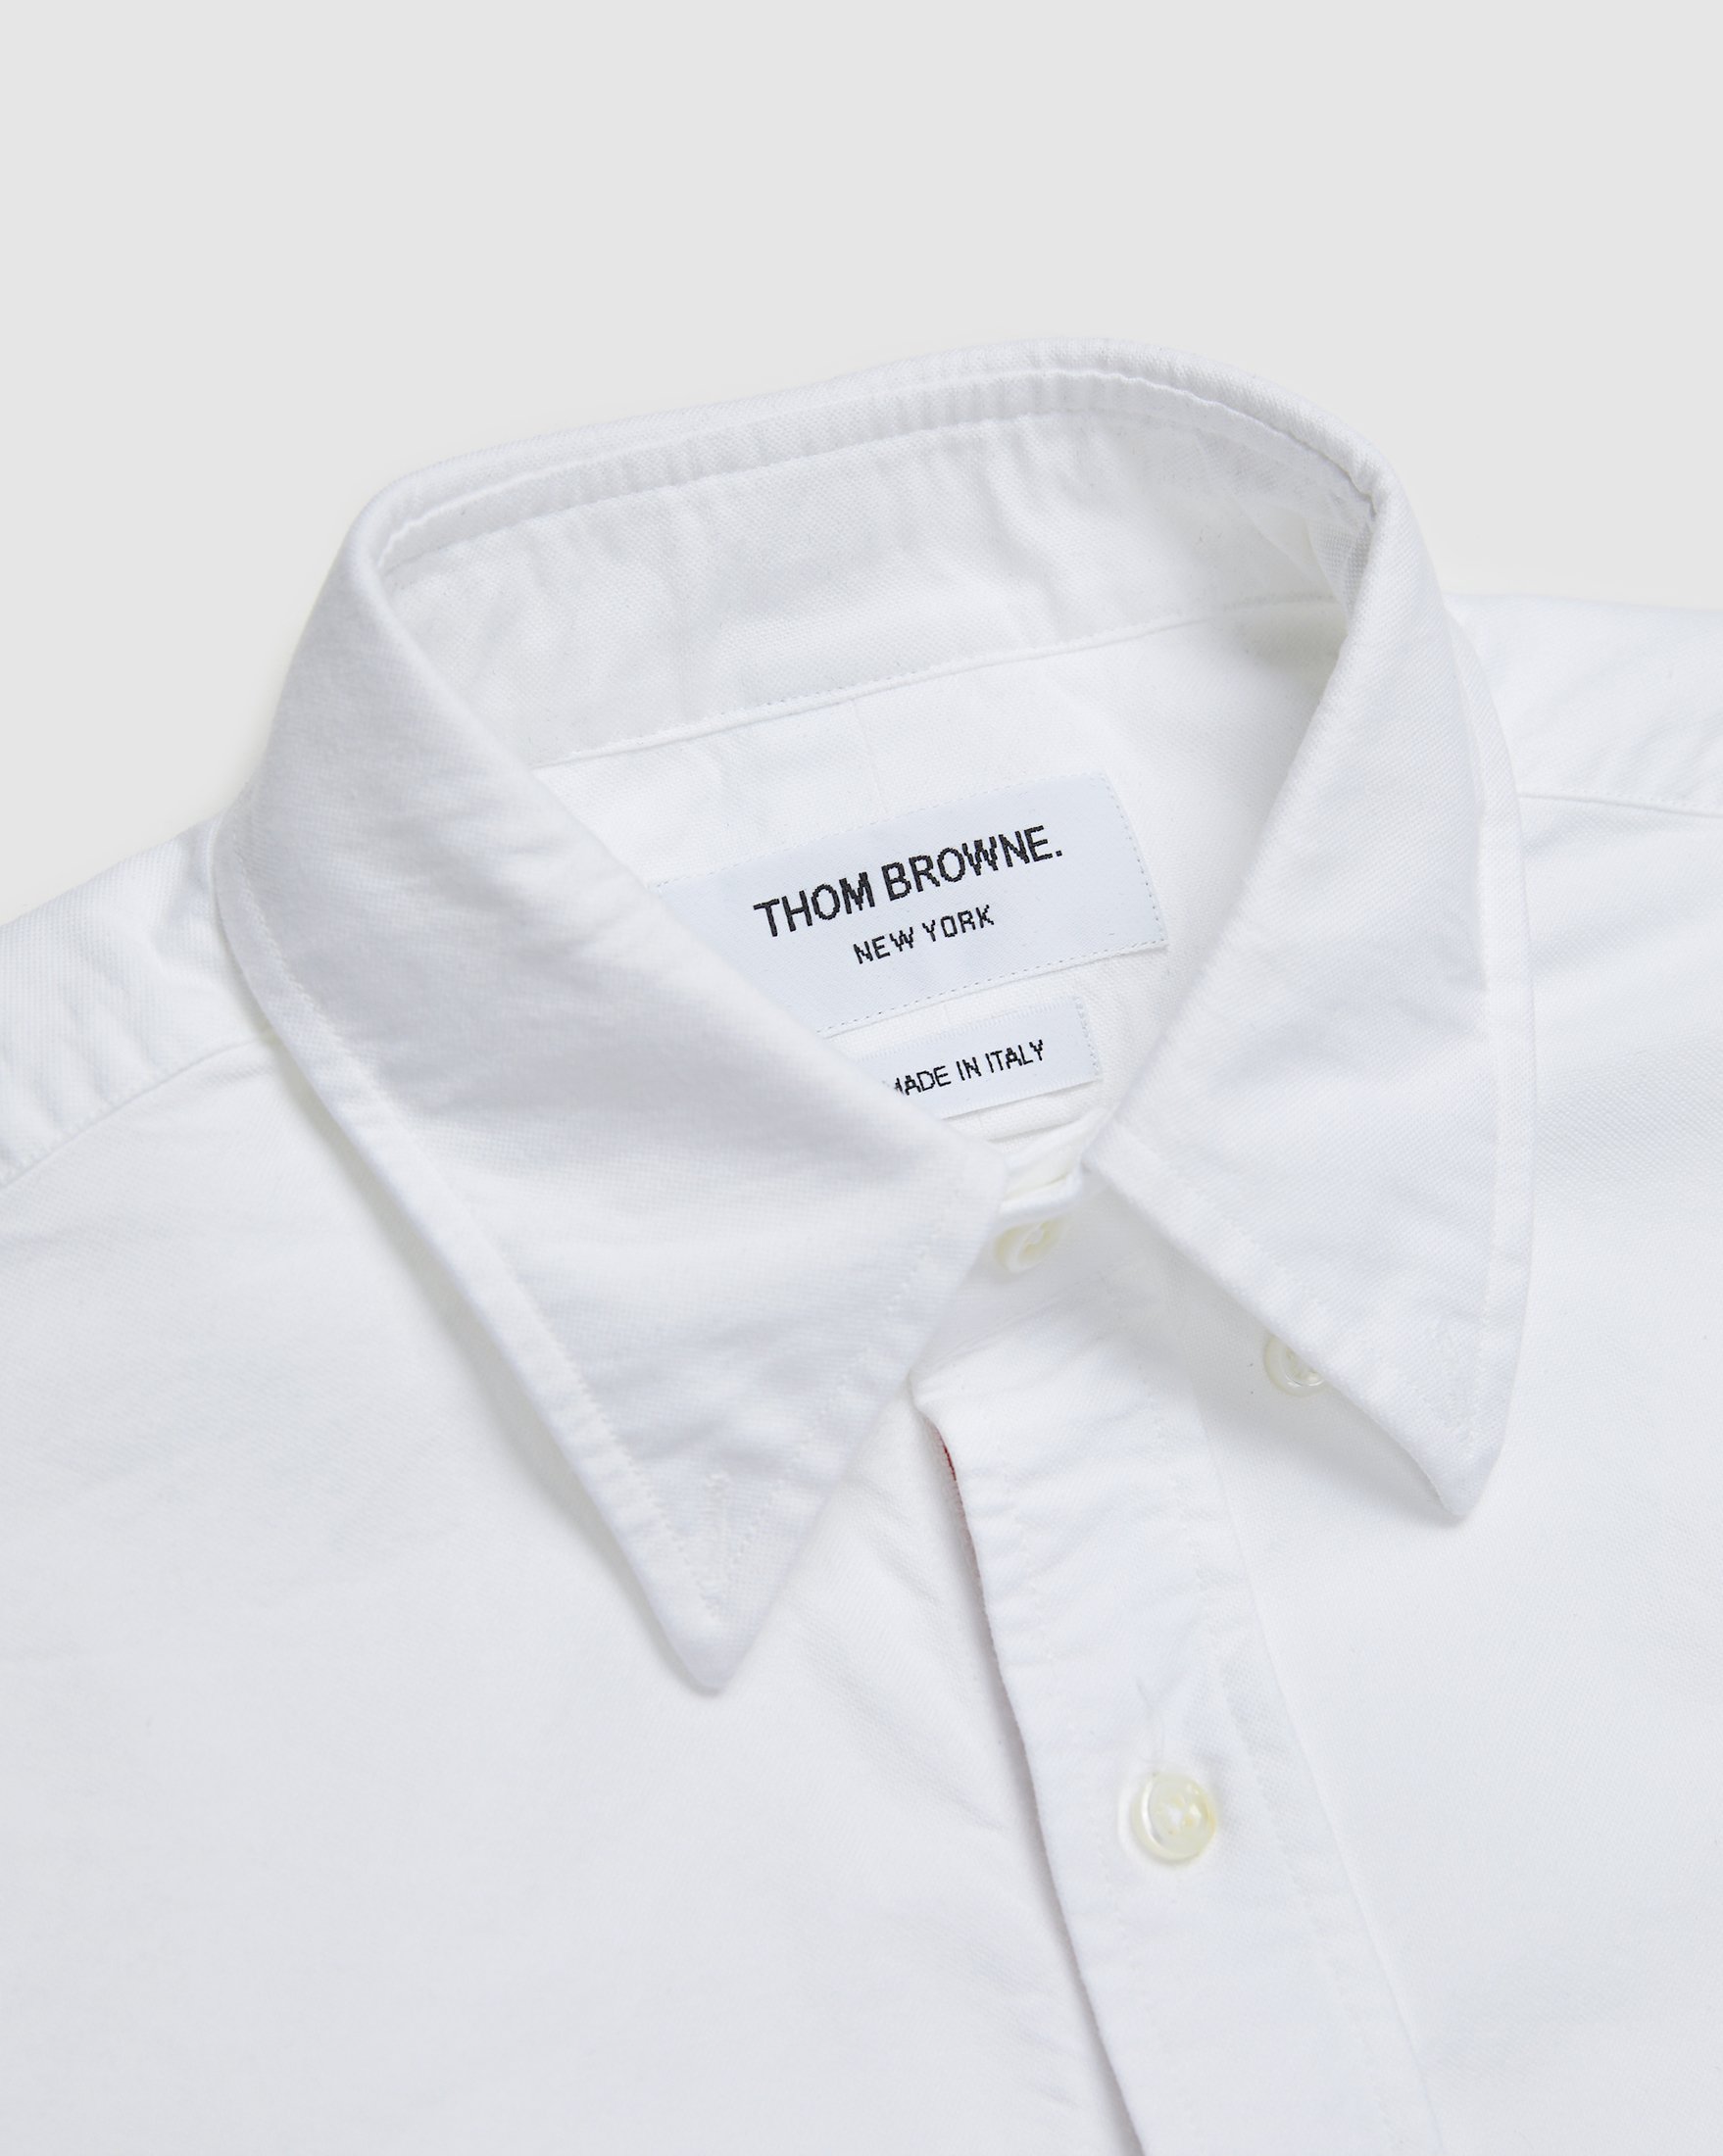 Colette Mon Amour x Thom Browne - White Heart Classic Shirt - Clothing - White - Image 3